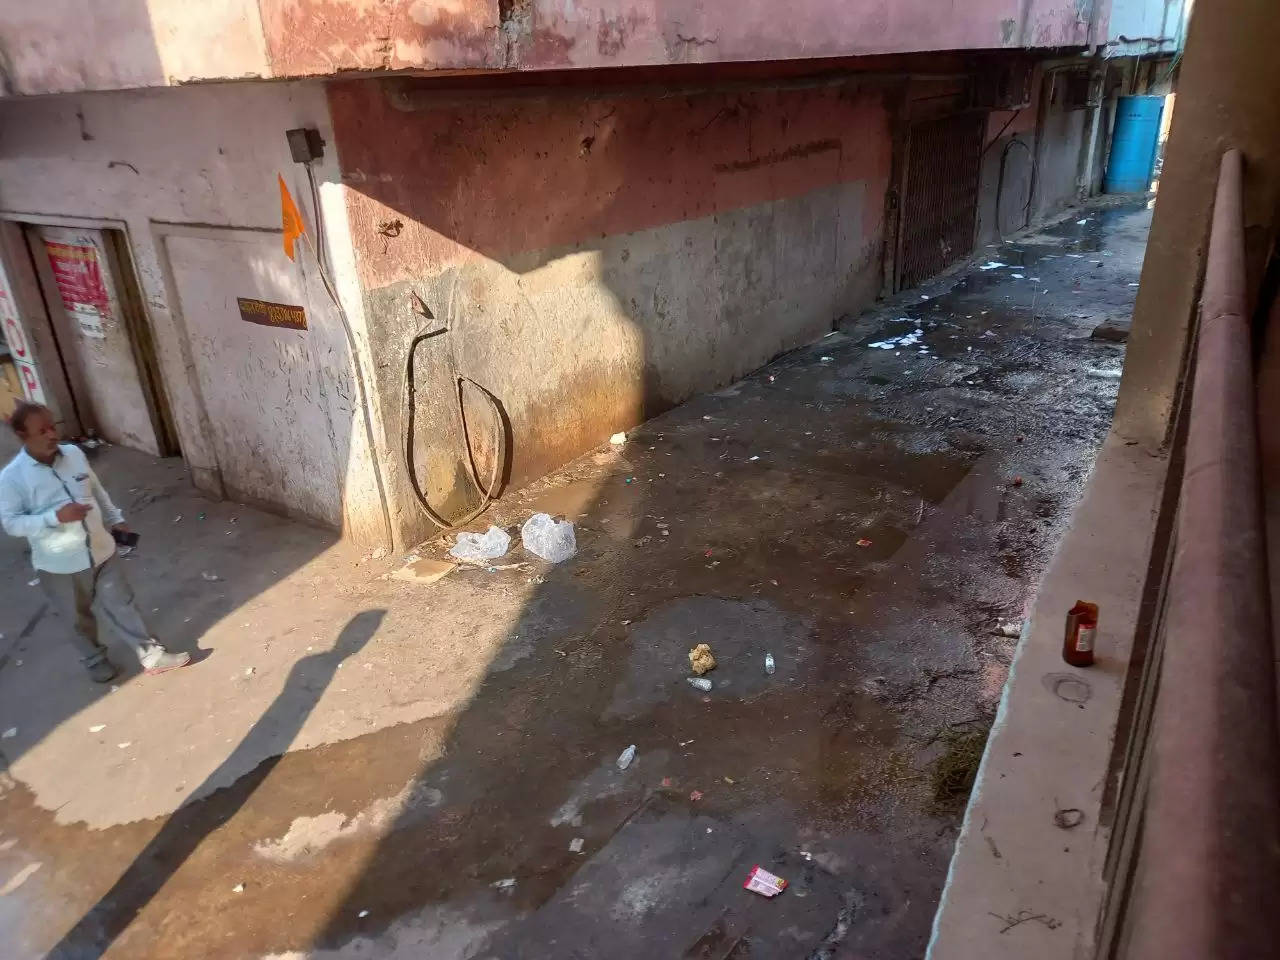 Crores of Property of the Udaipur Municipality is lying in tatters, den of drunkards, murderers and history sheeters of udaipur hathipol sabzi mandi